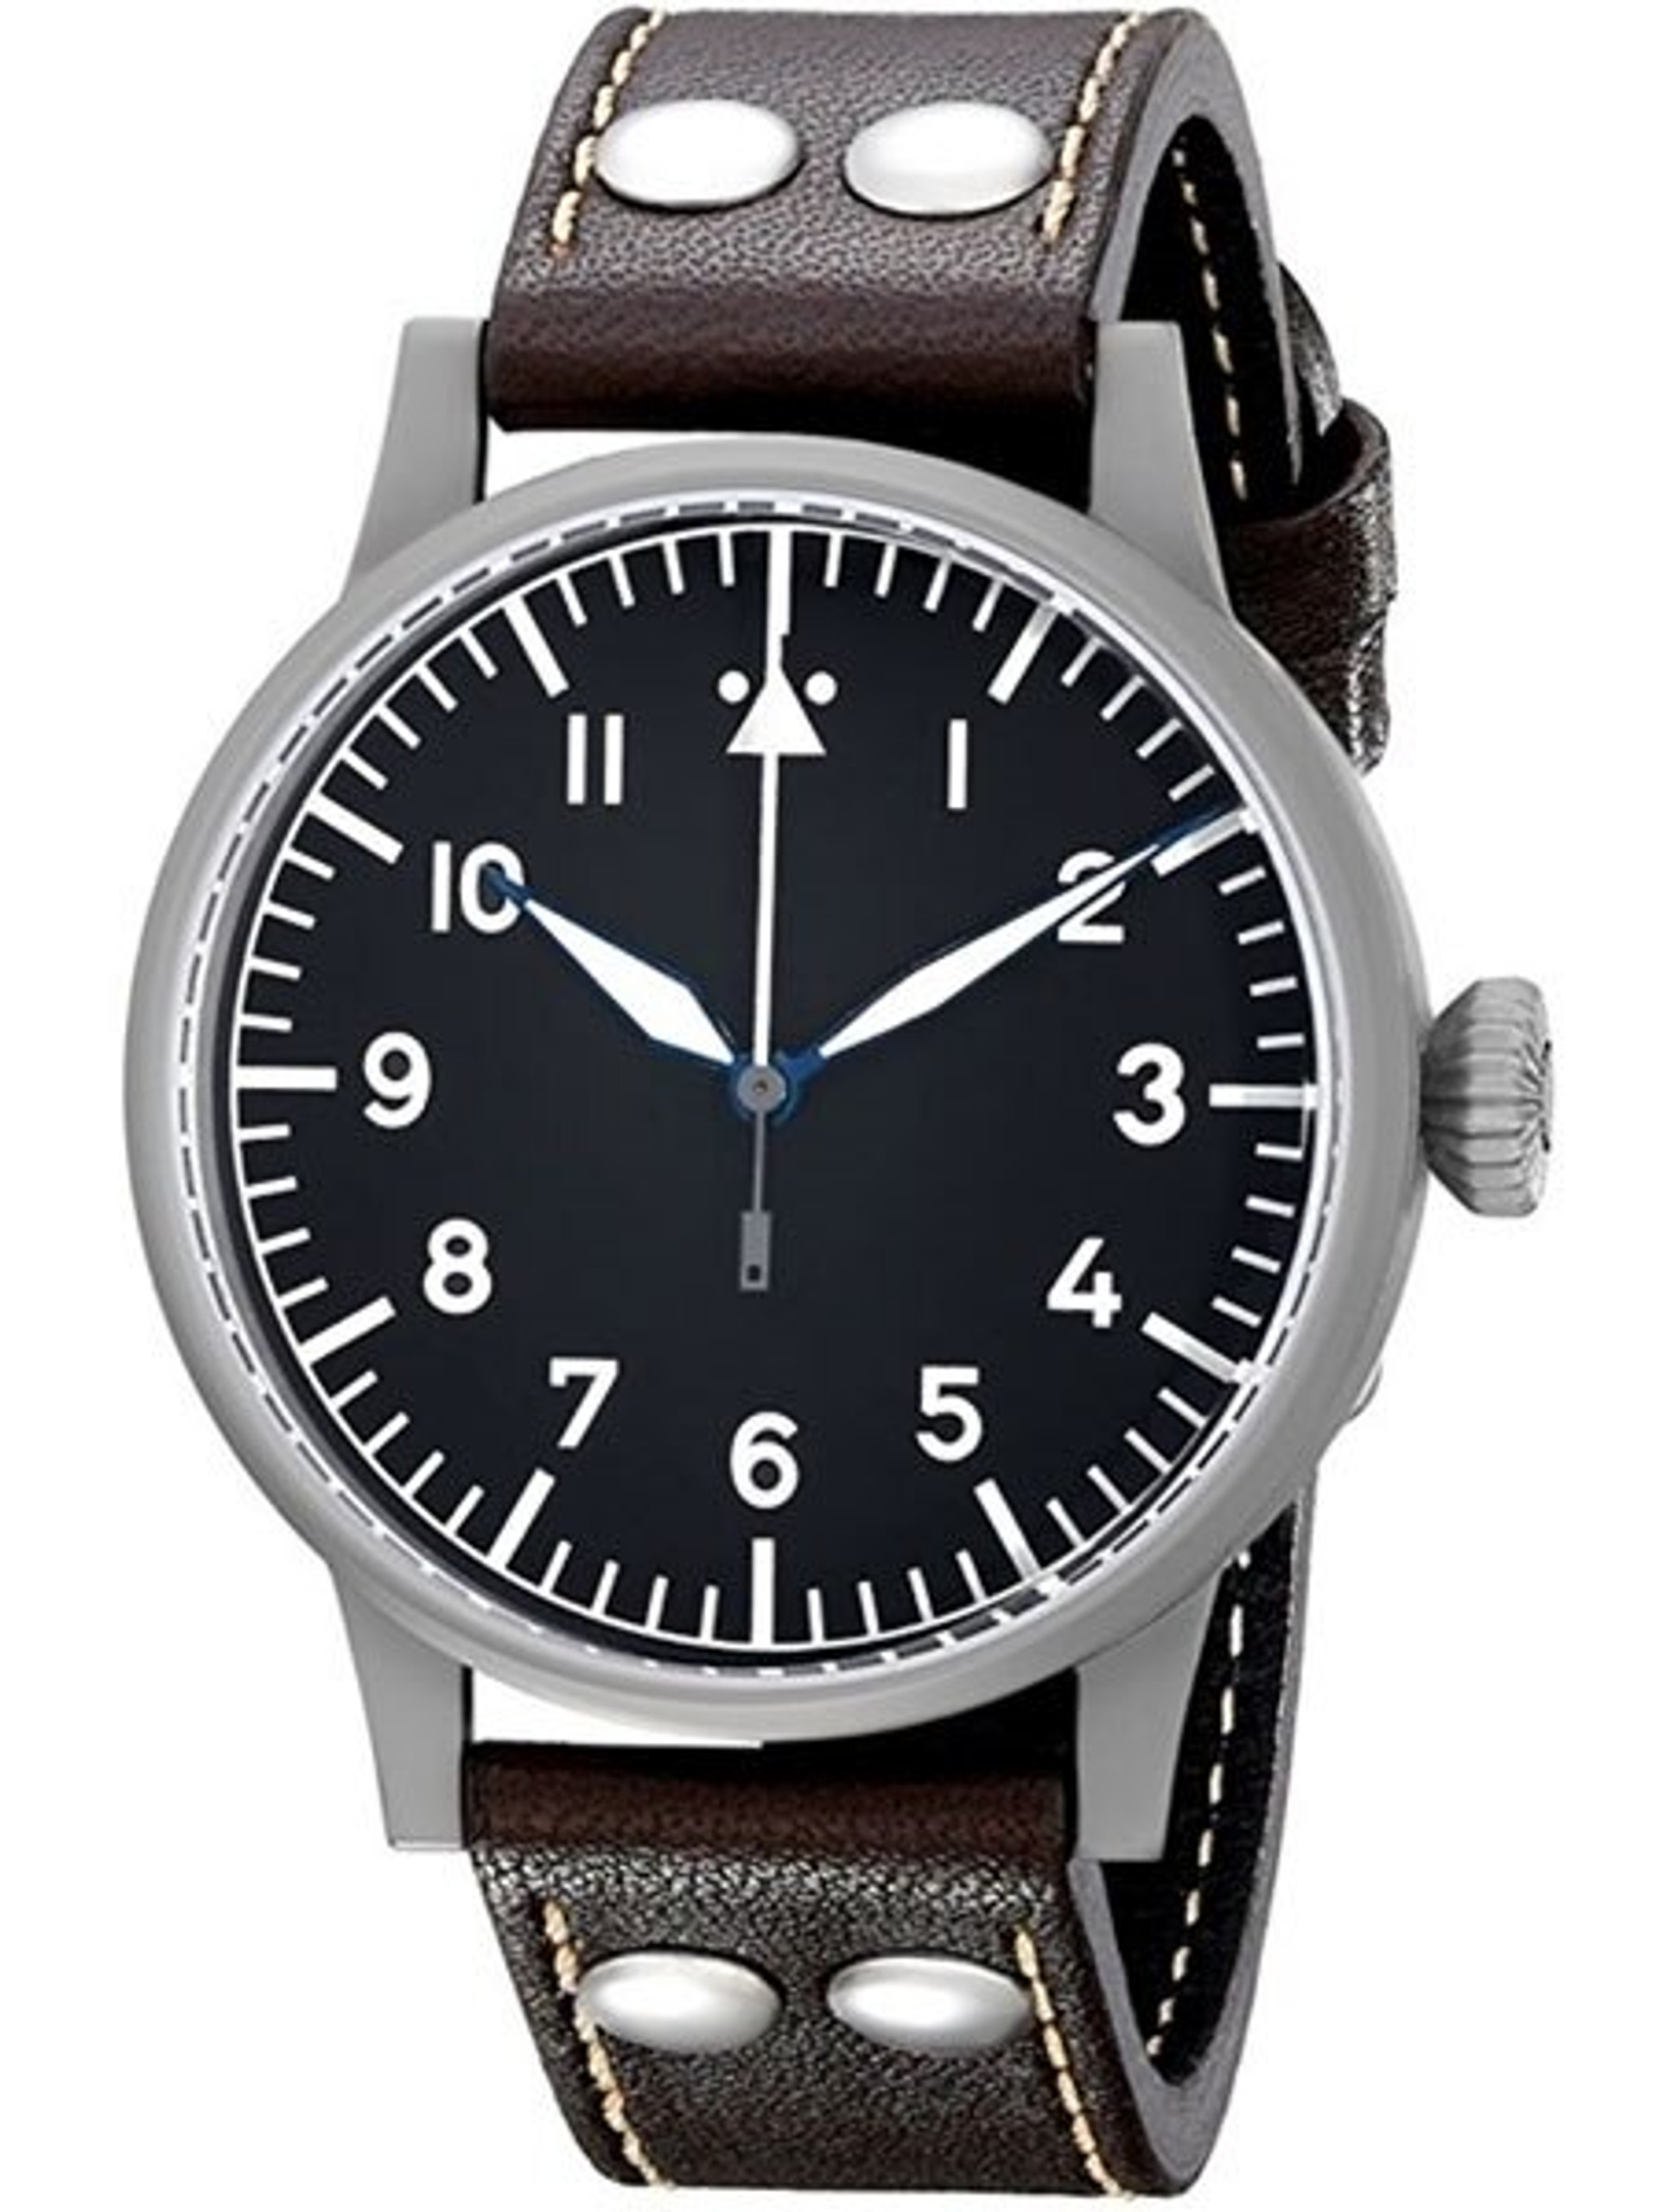 Laco Munster Type A Dial Swiss Automatic Pilot Watch with Sapphire ...